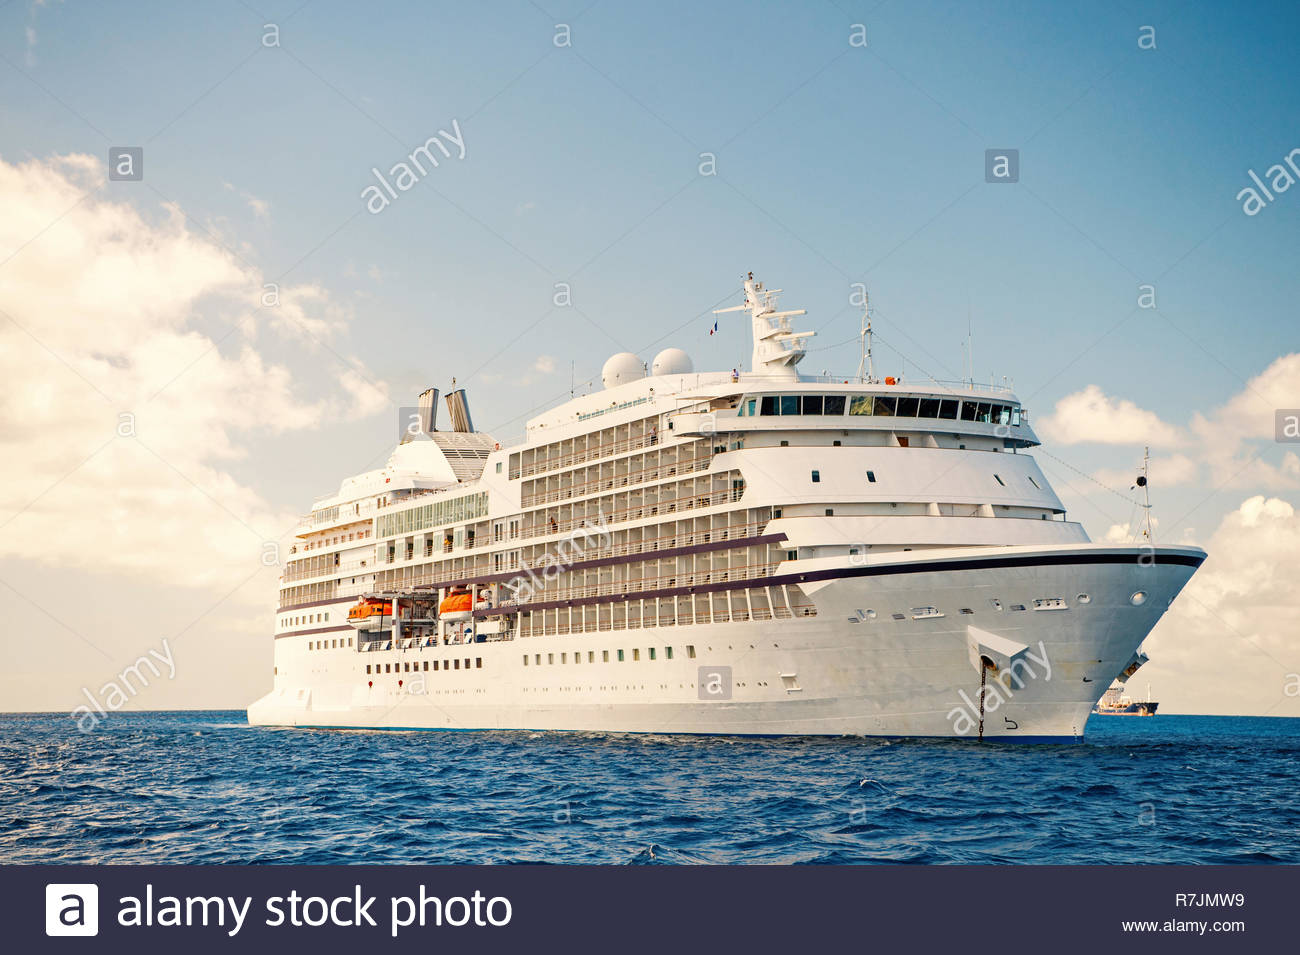 Cruise Ship Large Luxury White Liner On Sea Water And